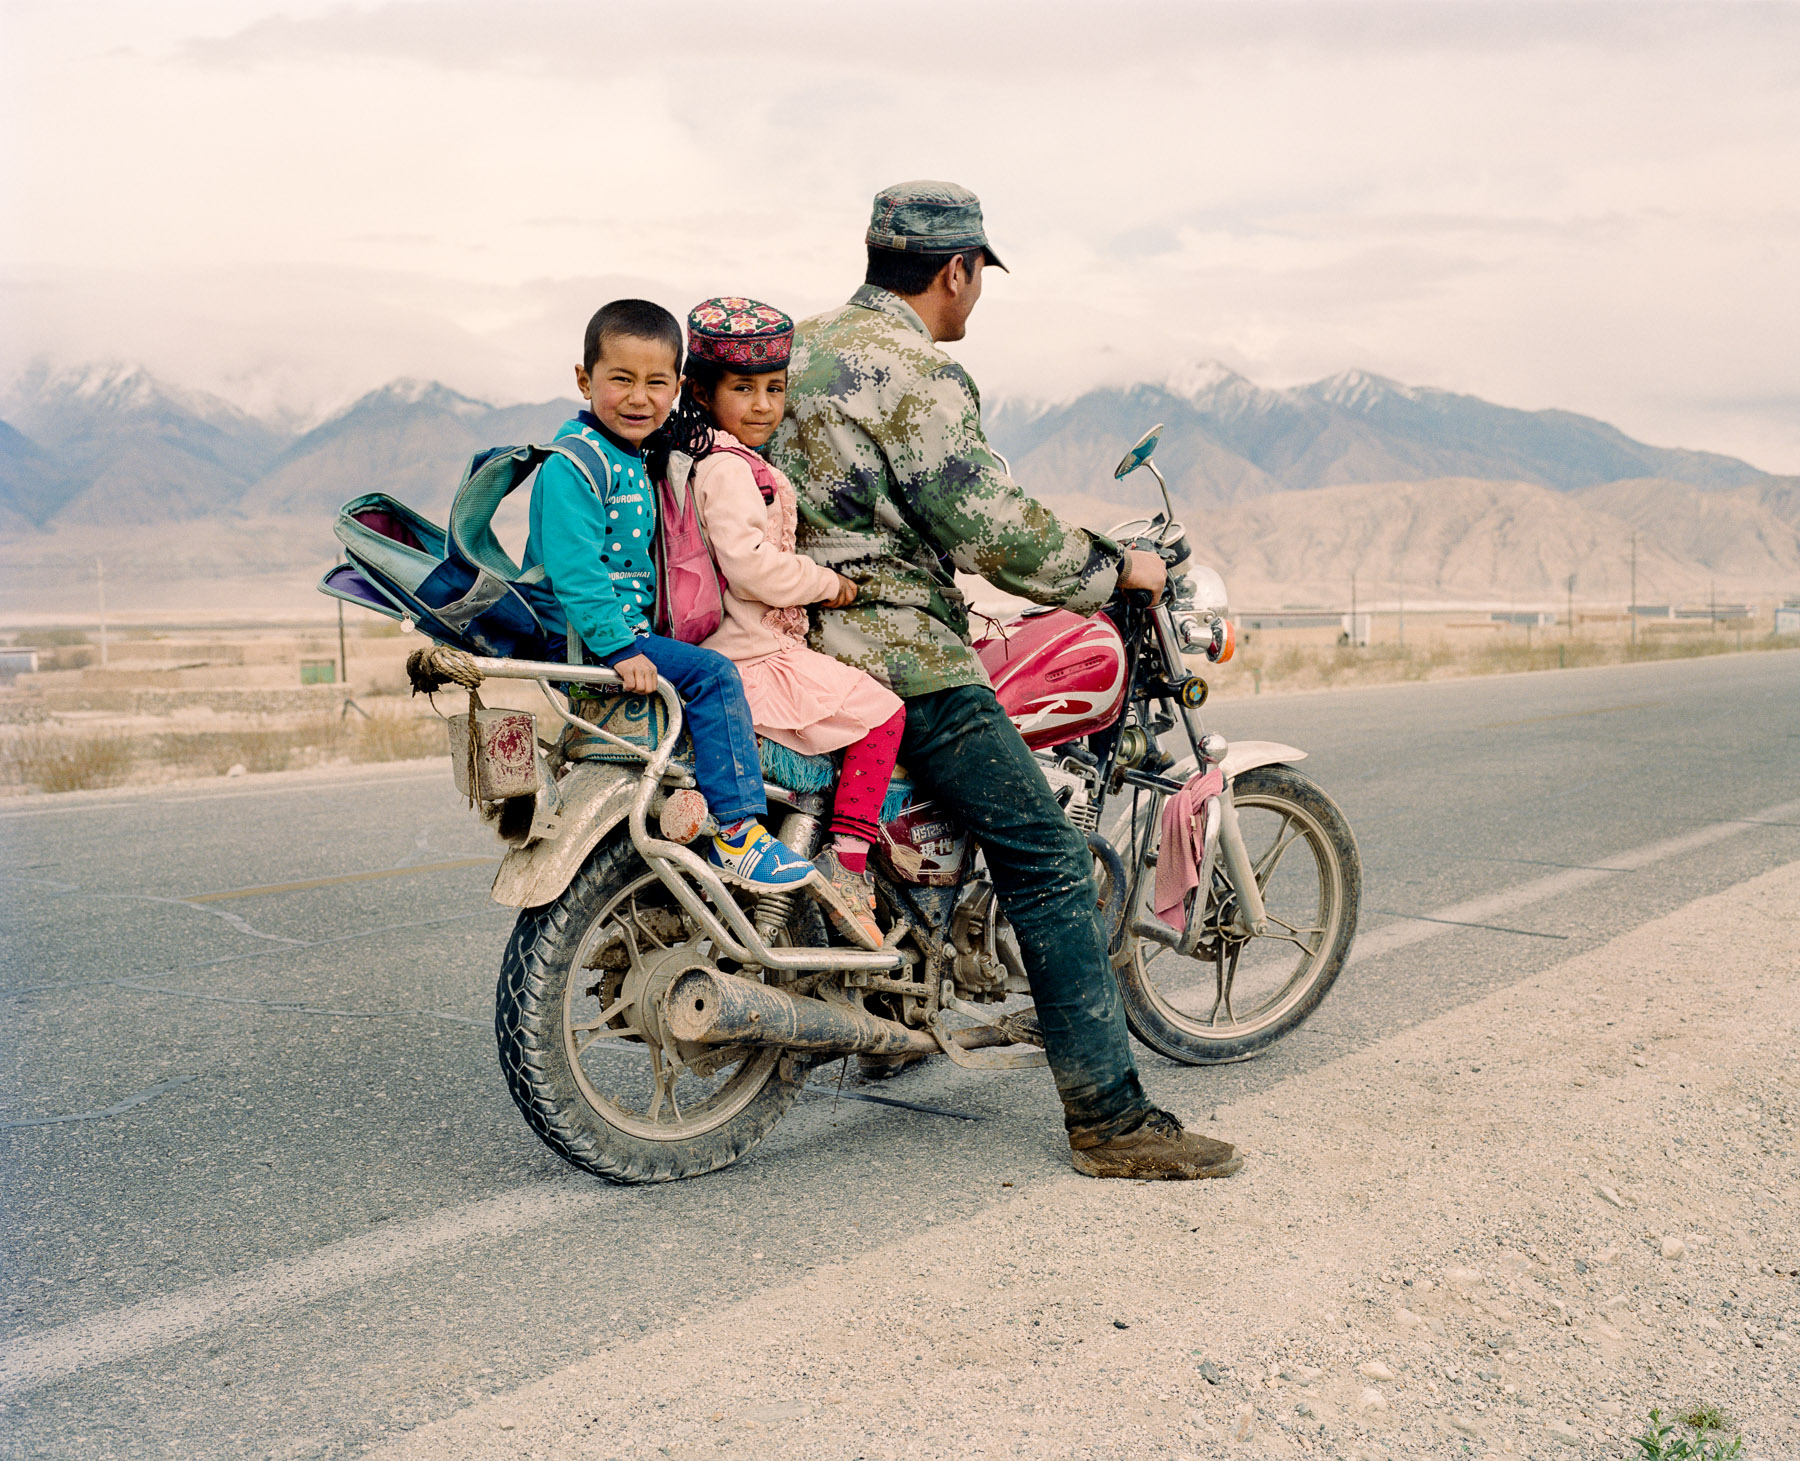  May 2016. Xinjiang province, China. Tajik father and children on the departure on the Karakoram highway that connects the Western Chinese province of Xinjiang with Pakistan and for quite a stretch runs along the Tajik border.  